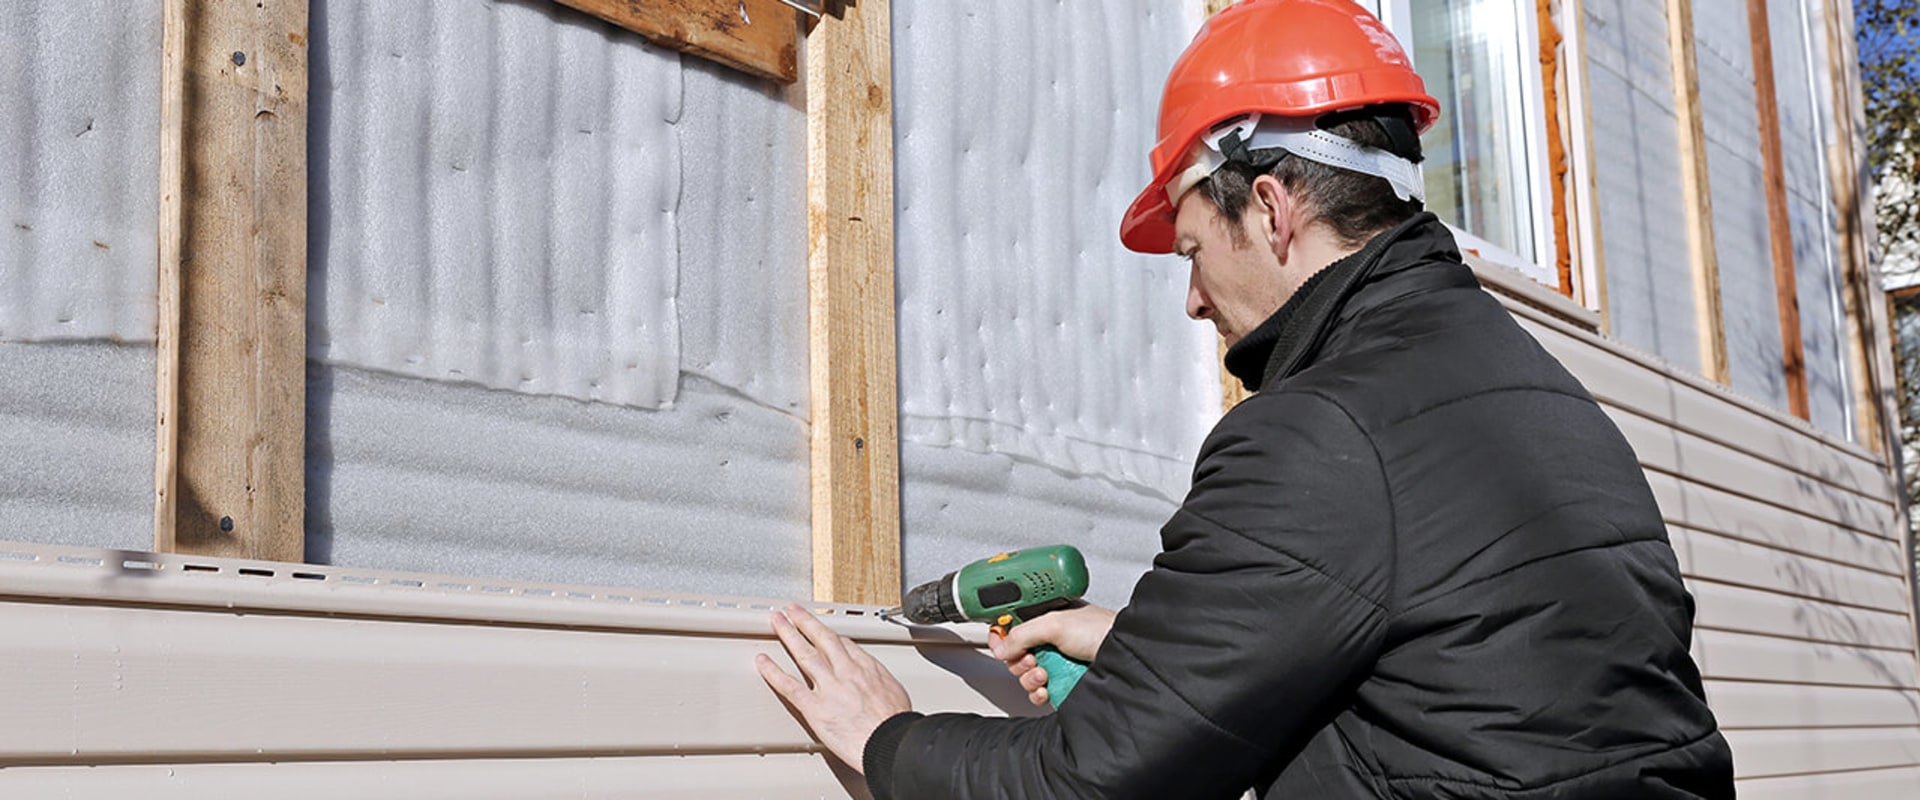 How much does a square of vinyl siding cost at lowe's?